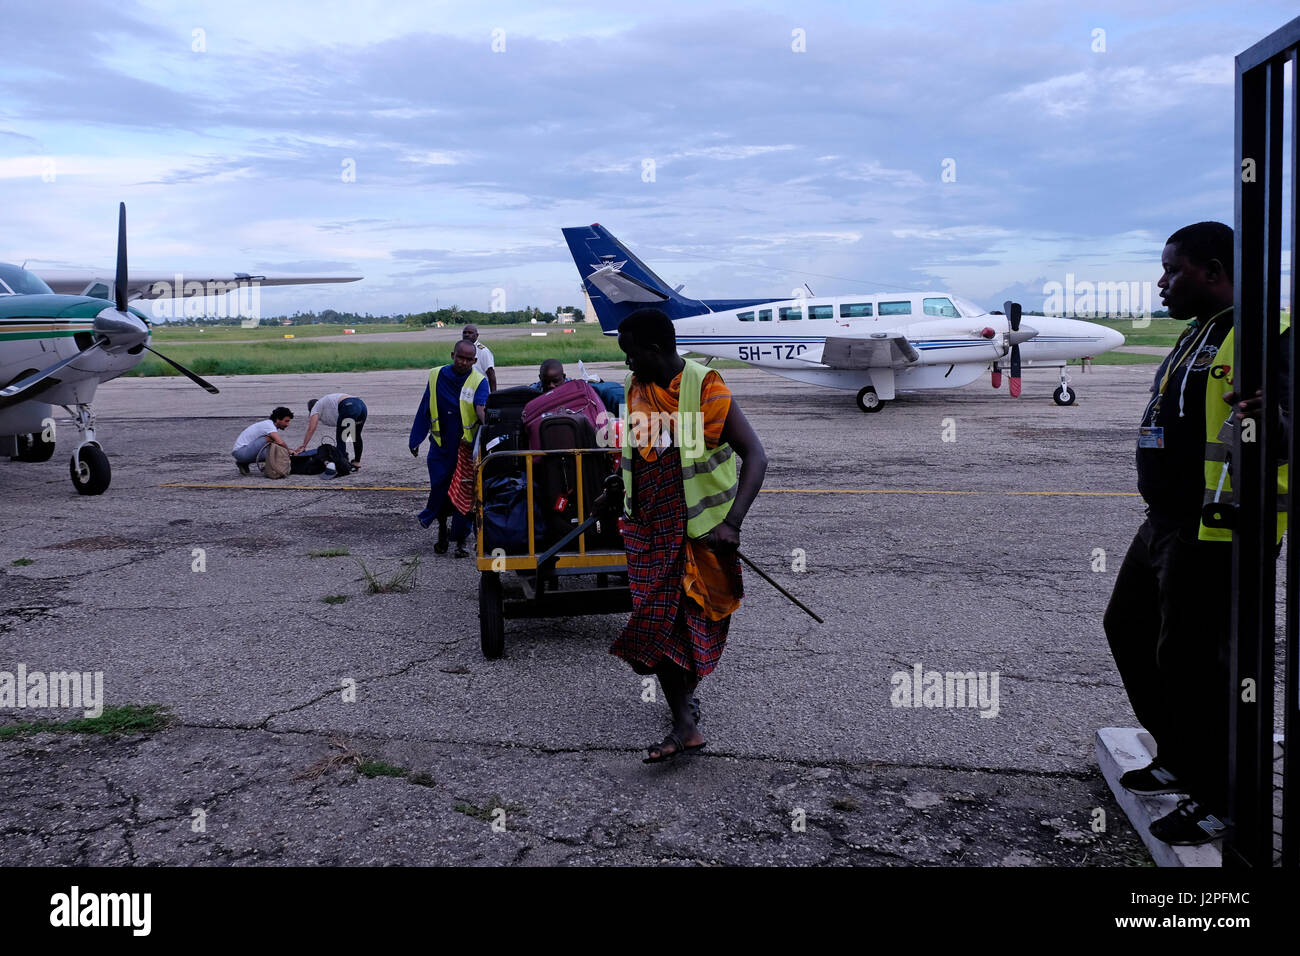 Baggage handlers push luggage that has been unloaded from a small aircraft at Julius nyerere airport in Dar es Salaam, the largest city of Tanzania in eastern Africa Stock Photo